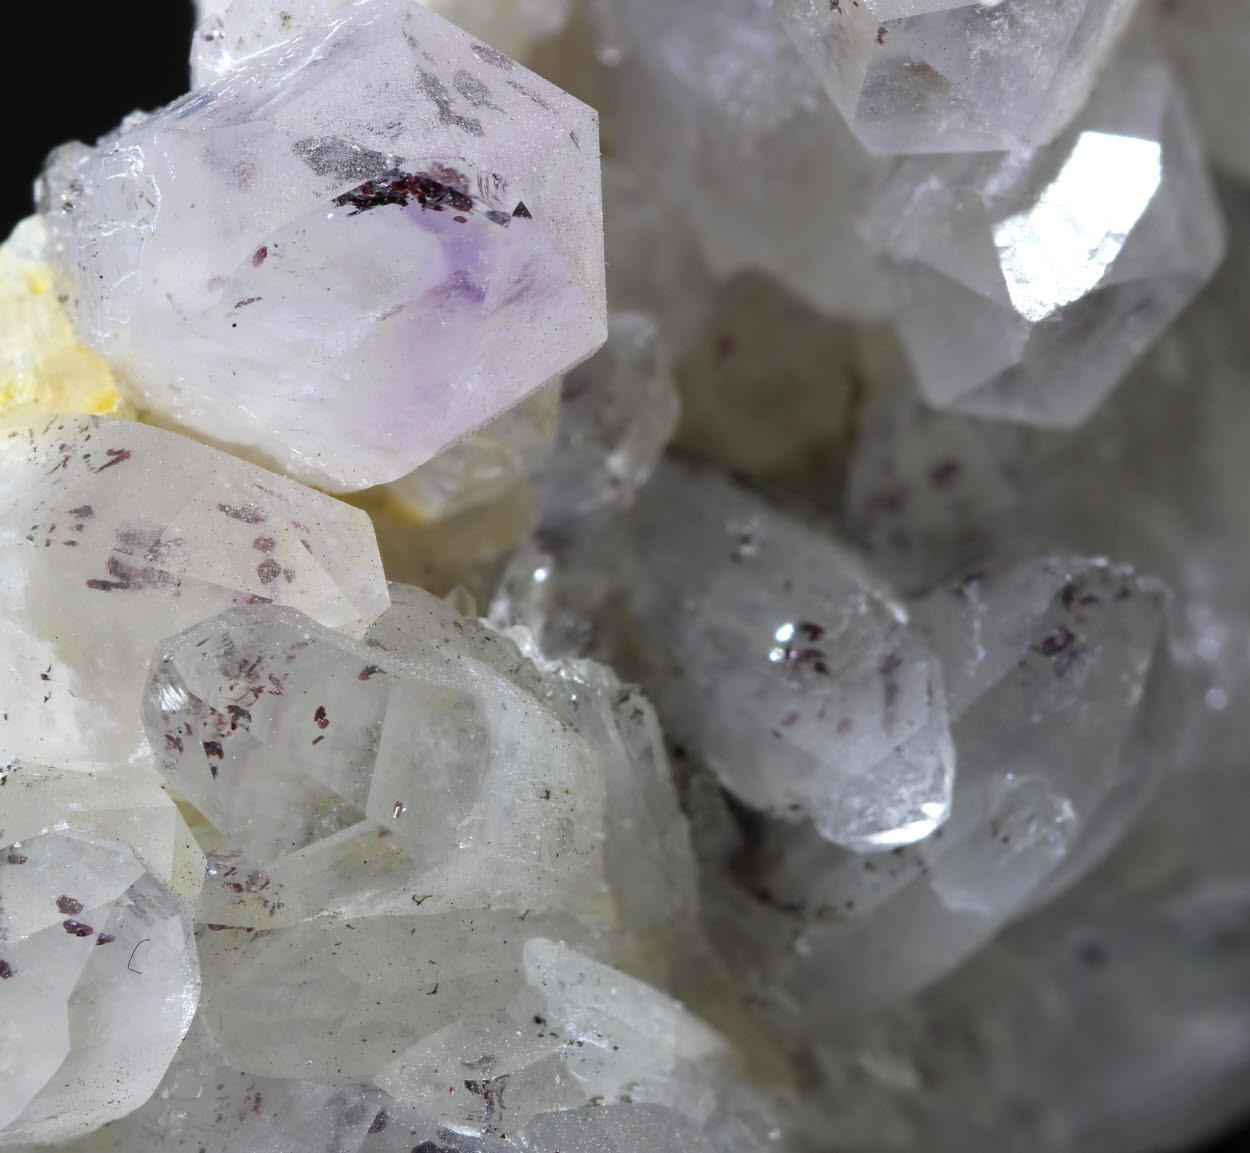 Amethyst With Lepidocrocite Inclusions